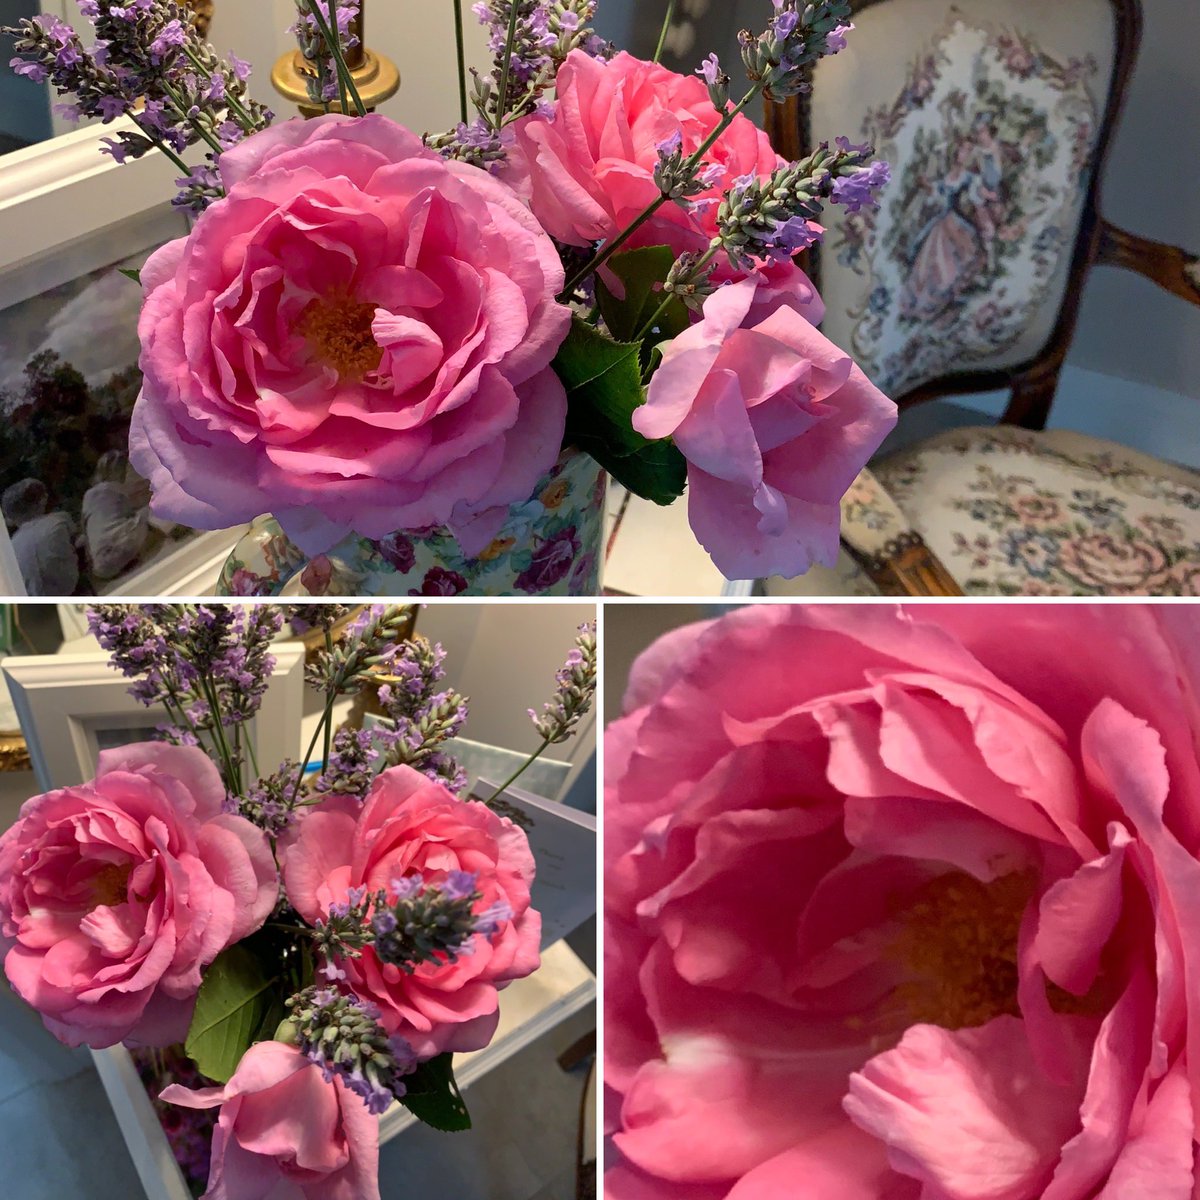 #Scent #FreshCuts #Lavender and #Roses